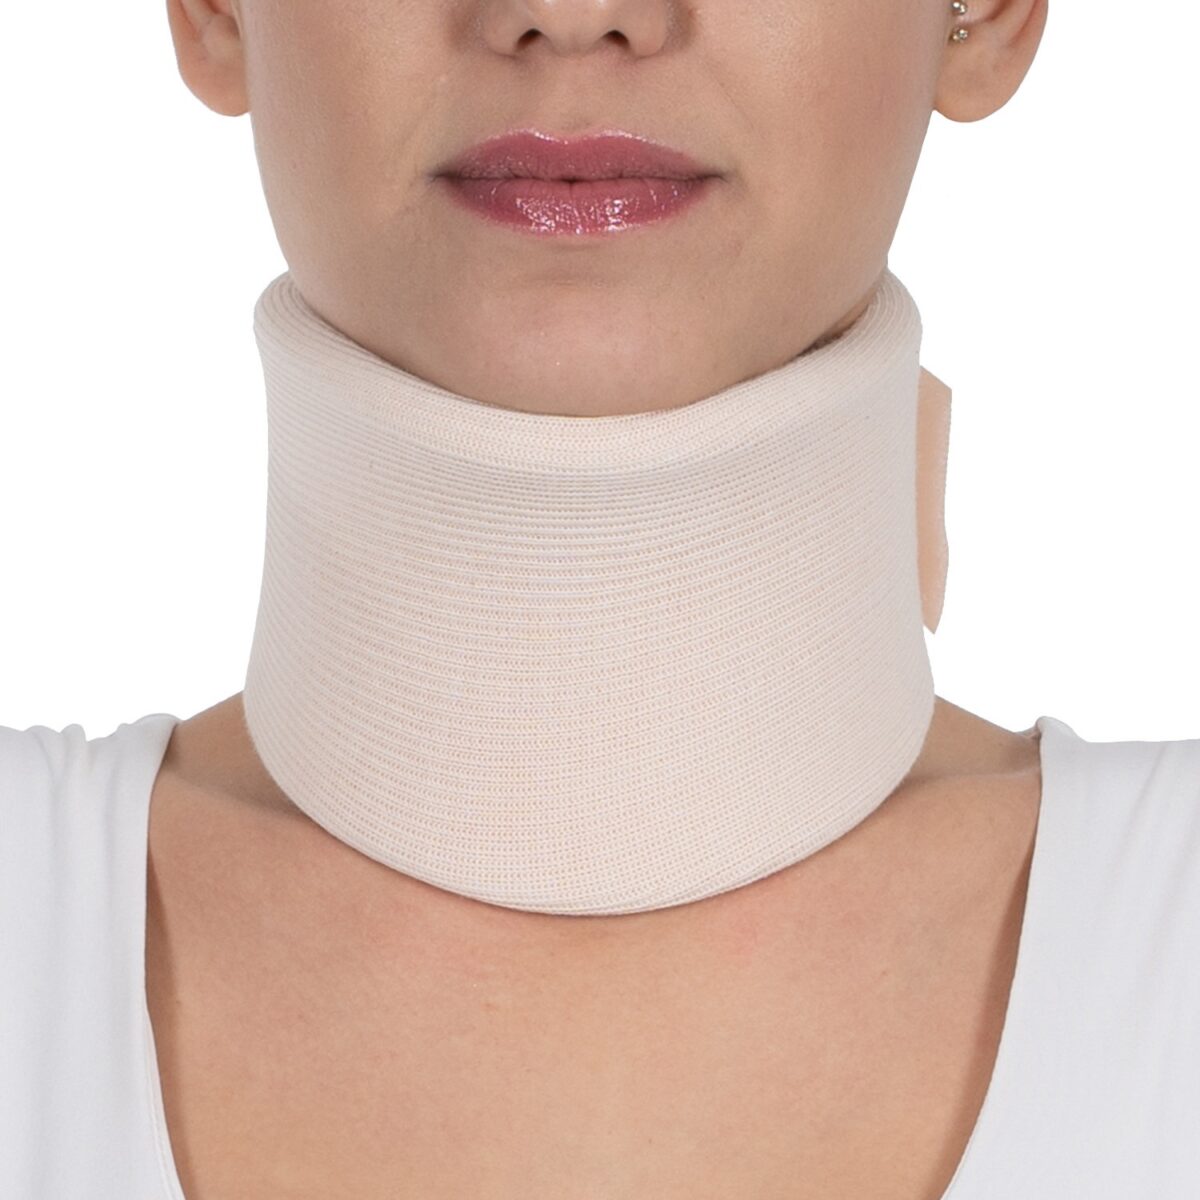 wingmed orthopedic equipments W104 nelson collar fabric coated product 6 1